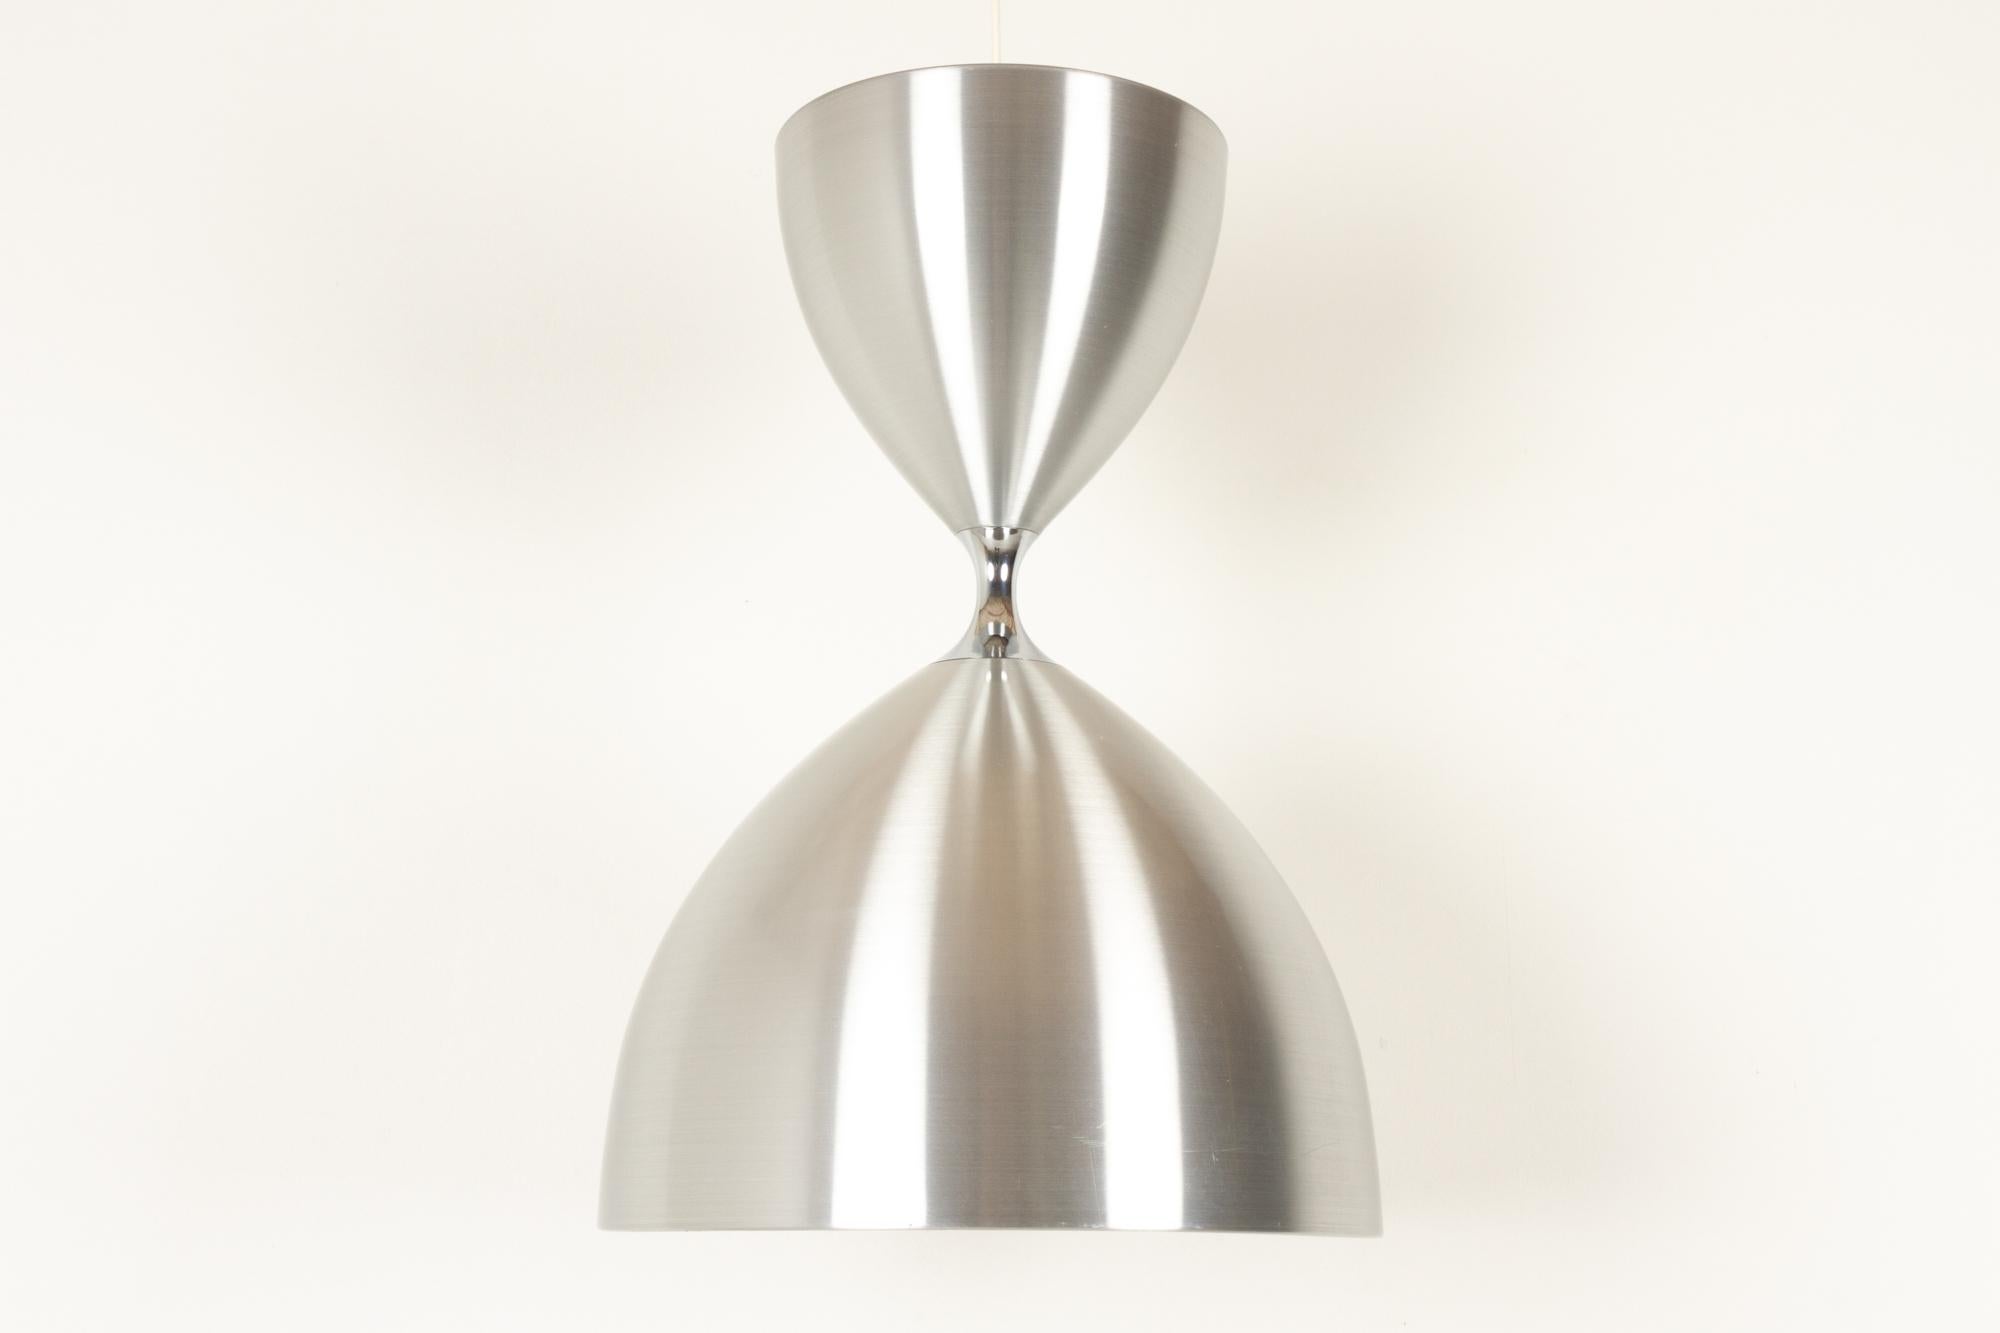 Vintage Danish Vega ceiling pendant by Jo Hammerborg for Fog & Mørup, 1960s.
Iconic Danish modern lighting design by Danish designer Jo Hammerborg. Large hourglass shaped ceiling lamp in brushed aluminium with dual function. Upward light in the top